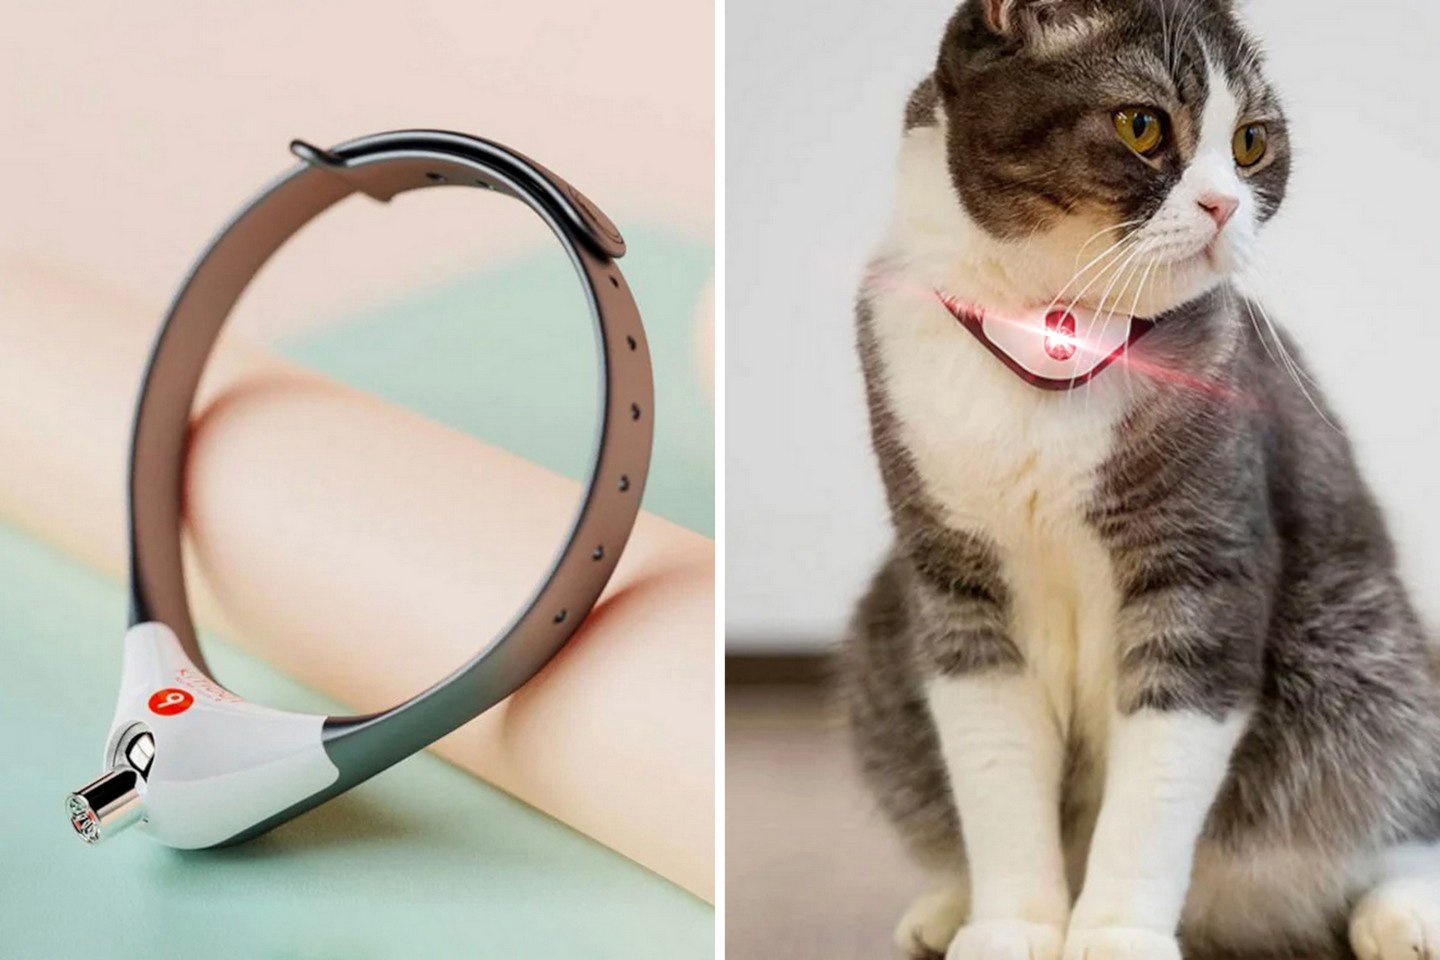 #Cat collar with built-in laser pointer promises to keep your feline occupied for hours!